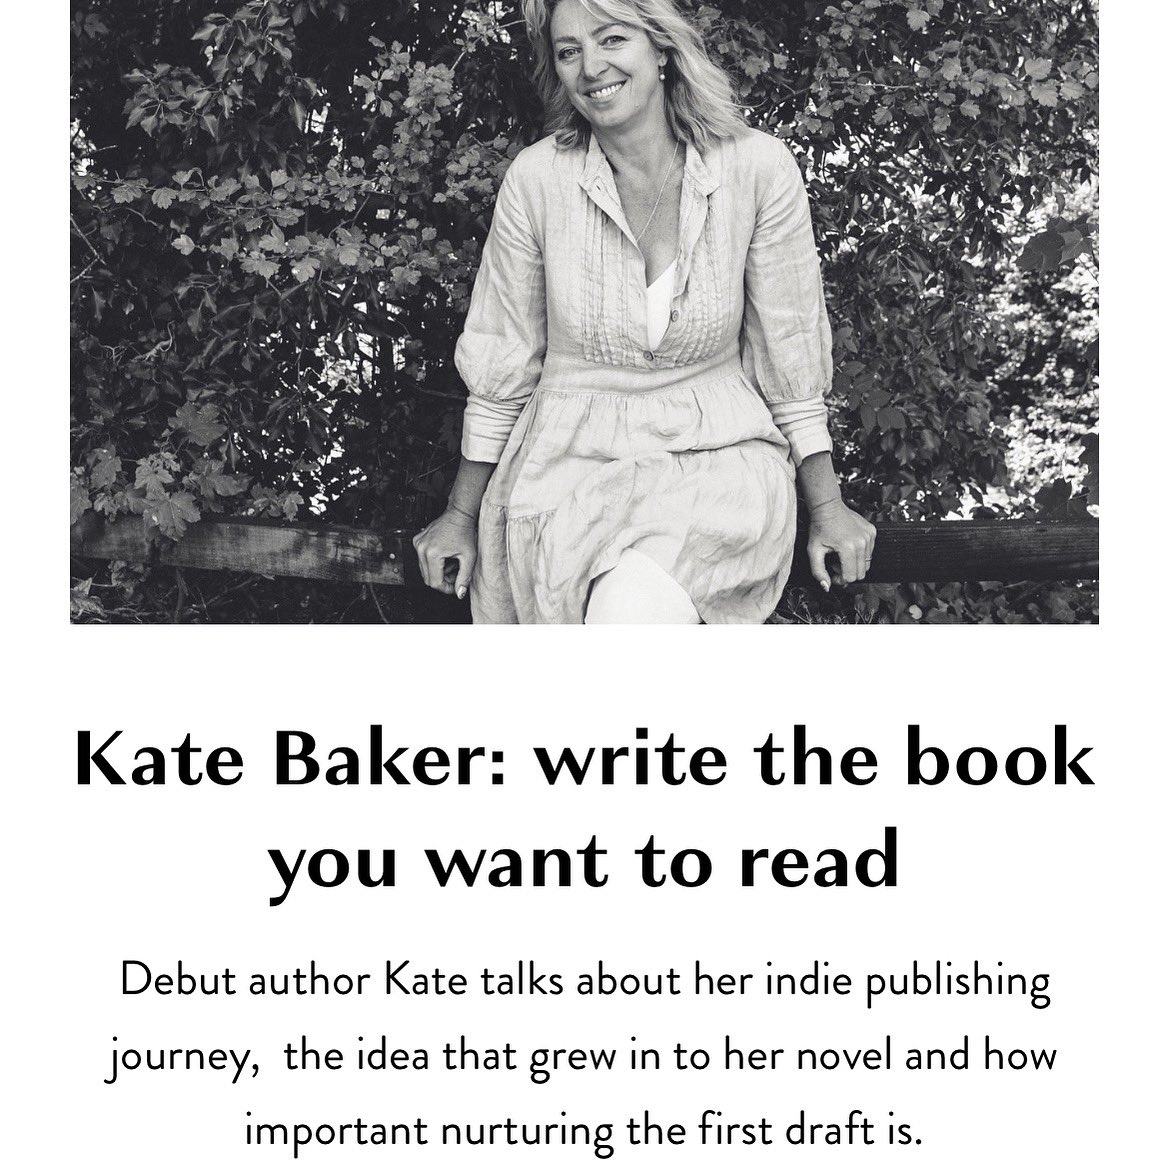 New blog post with @katefbaker all about her indie publication journey with advice for aspiring authors. Read here - sarabragg.com/author-blog/ka… 

#writingcommunity #authorinterview